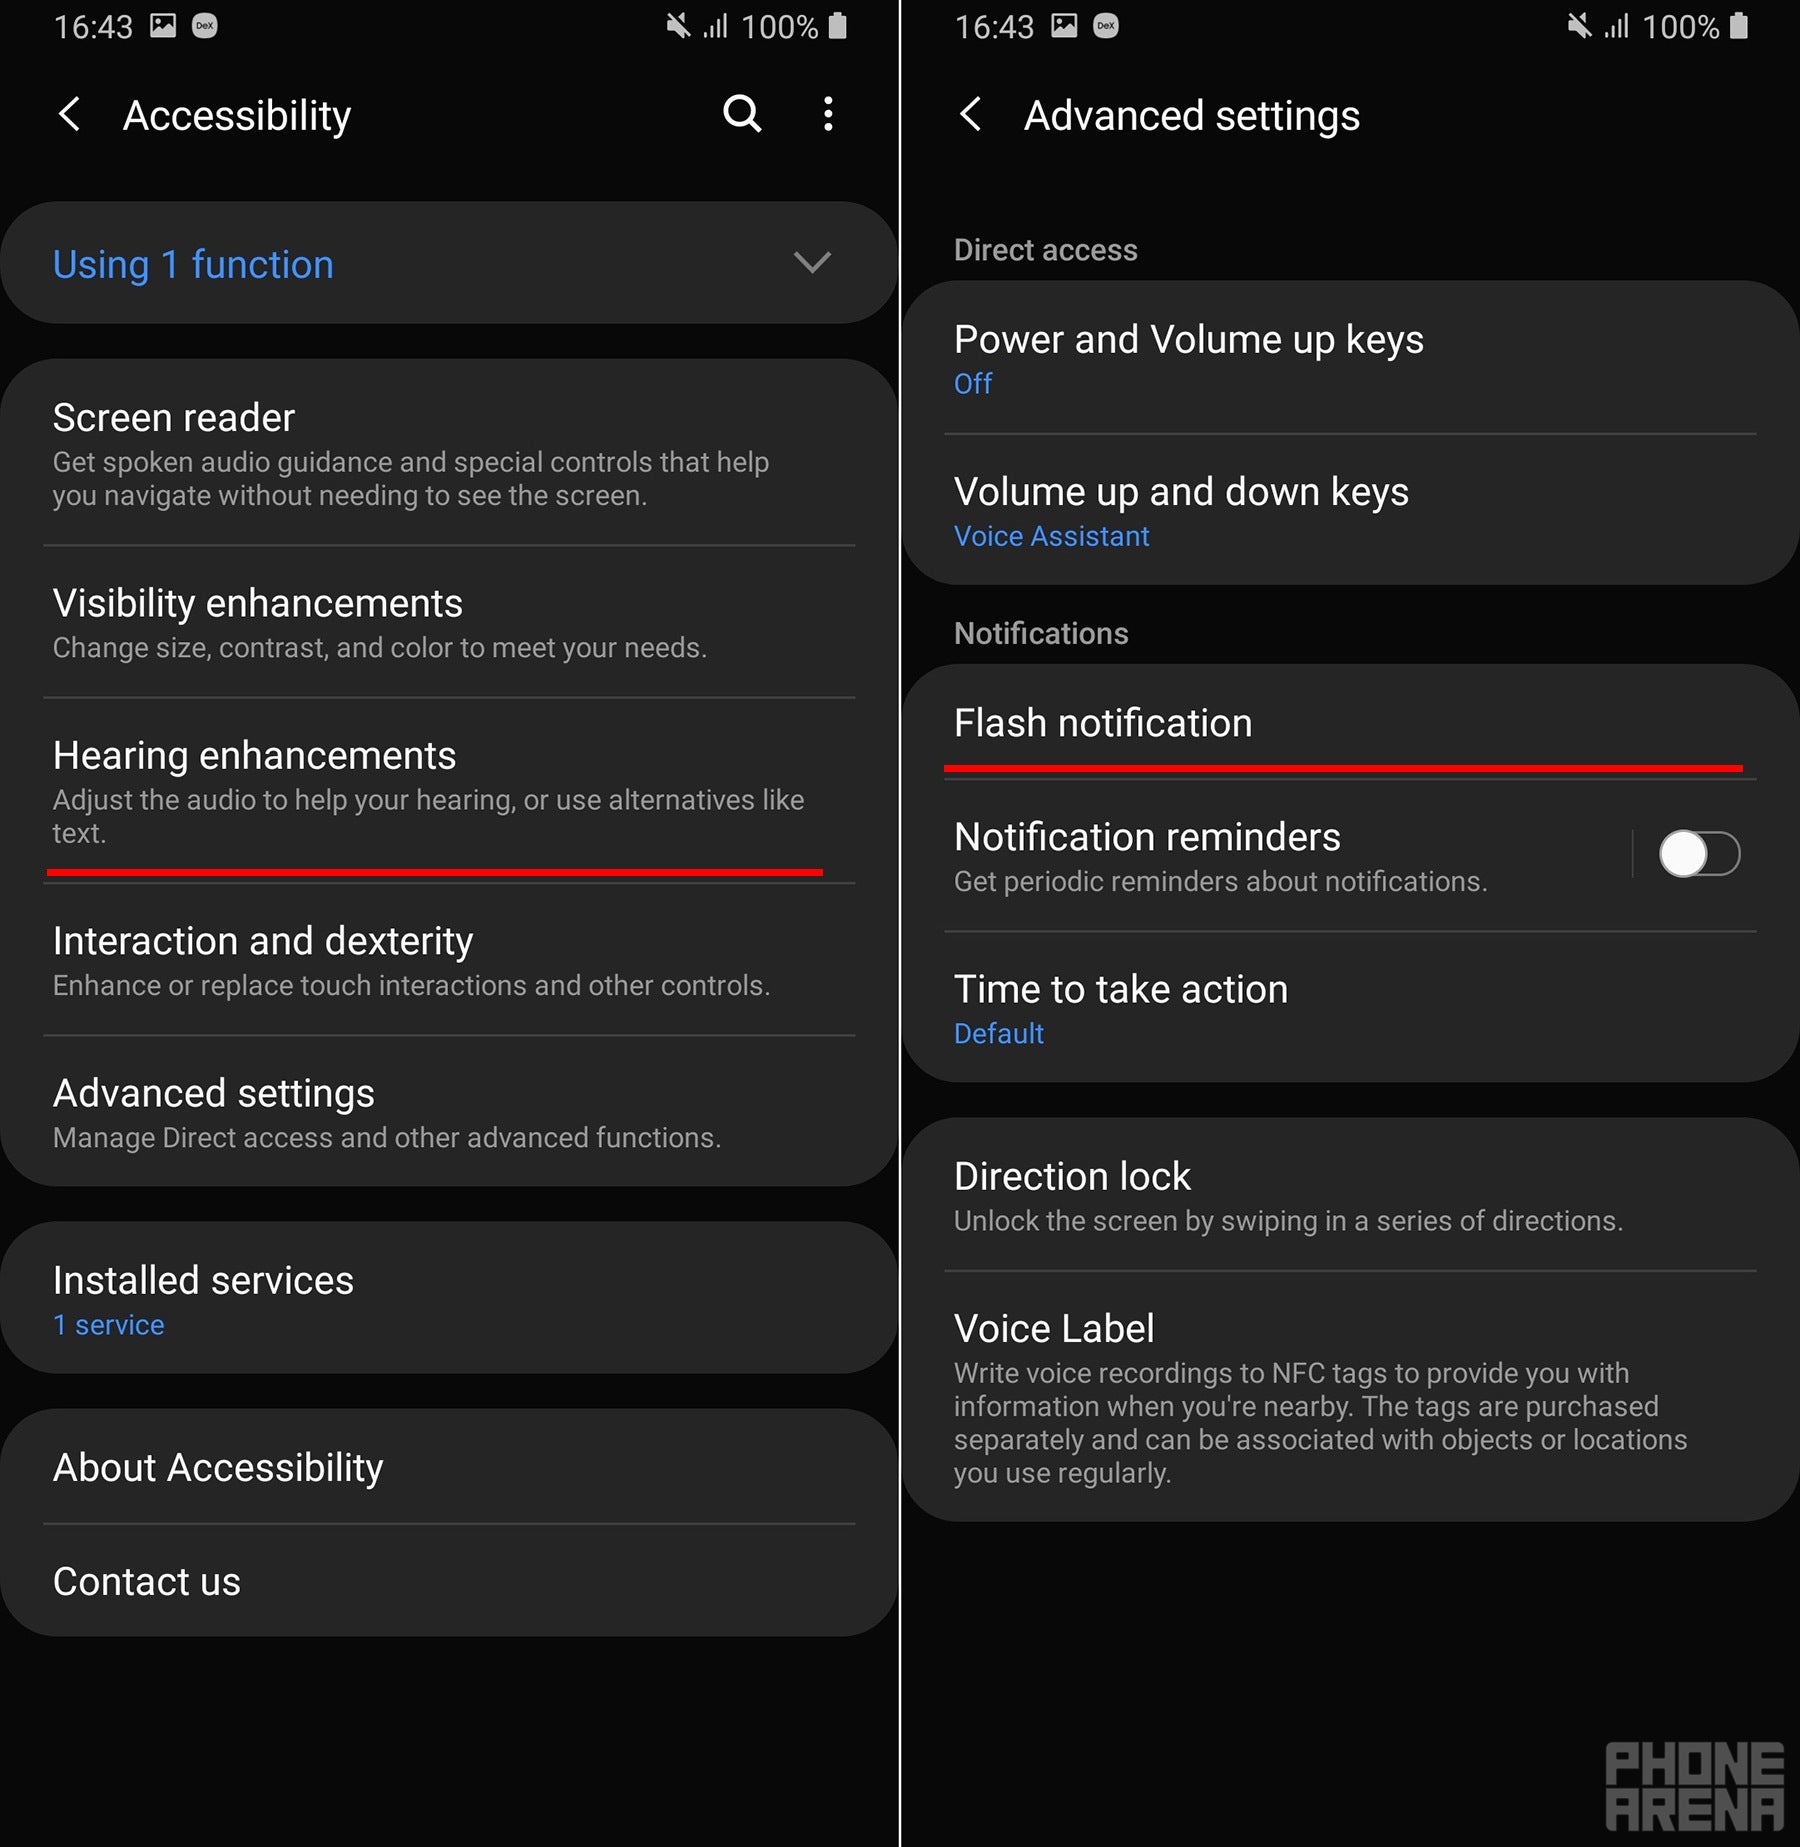 Android: how to make your phone&#039;s camera LED flash when receiving calls, messages, or notifications